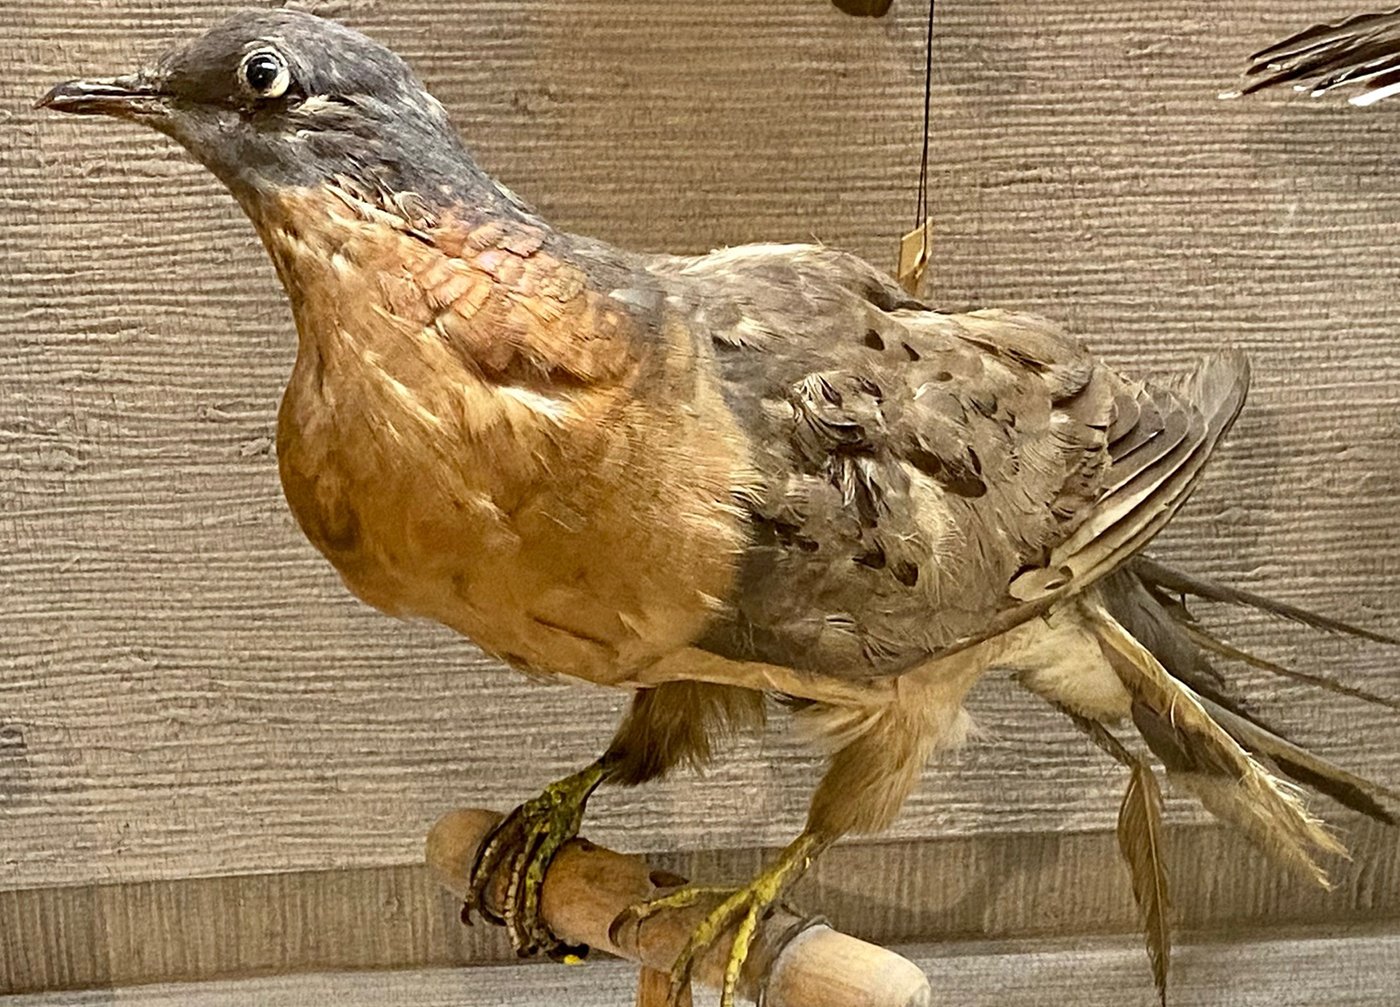 Our Passenger Pigeon, a species now extinct, was probably collected prior to 1900.